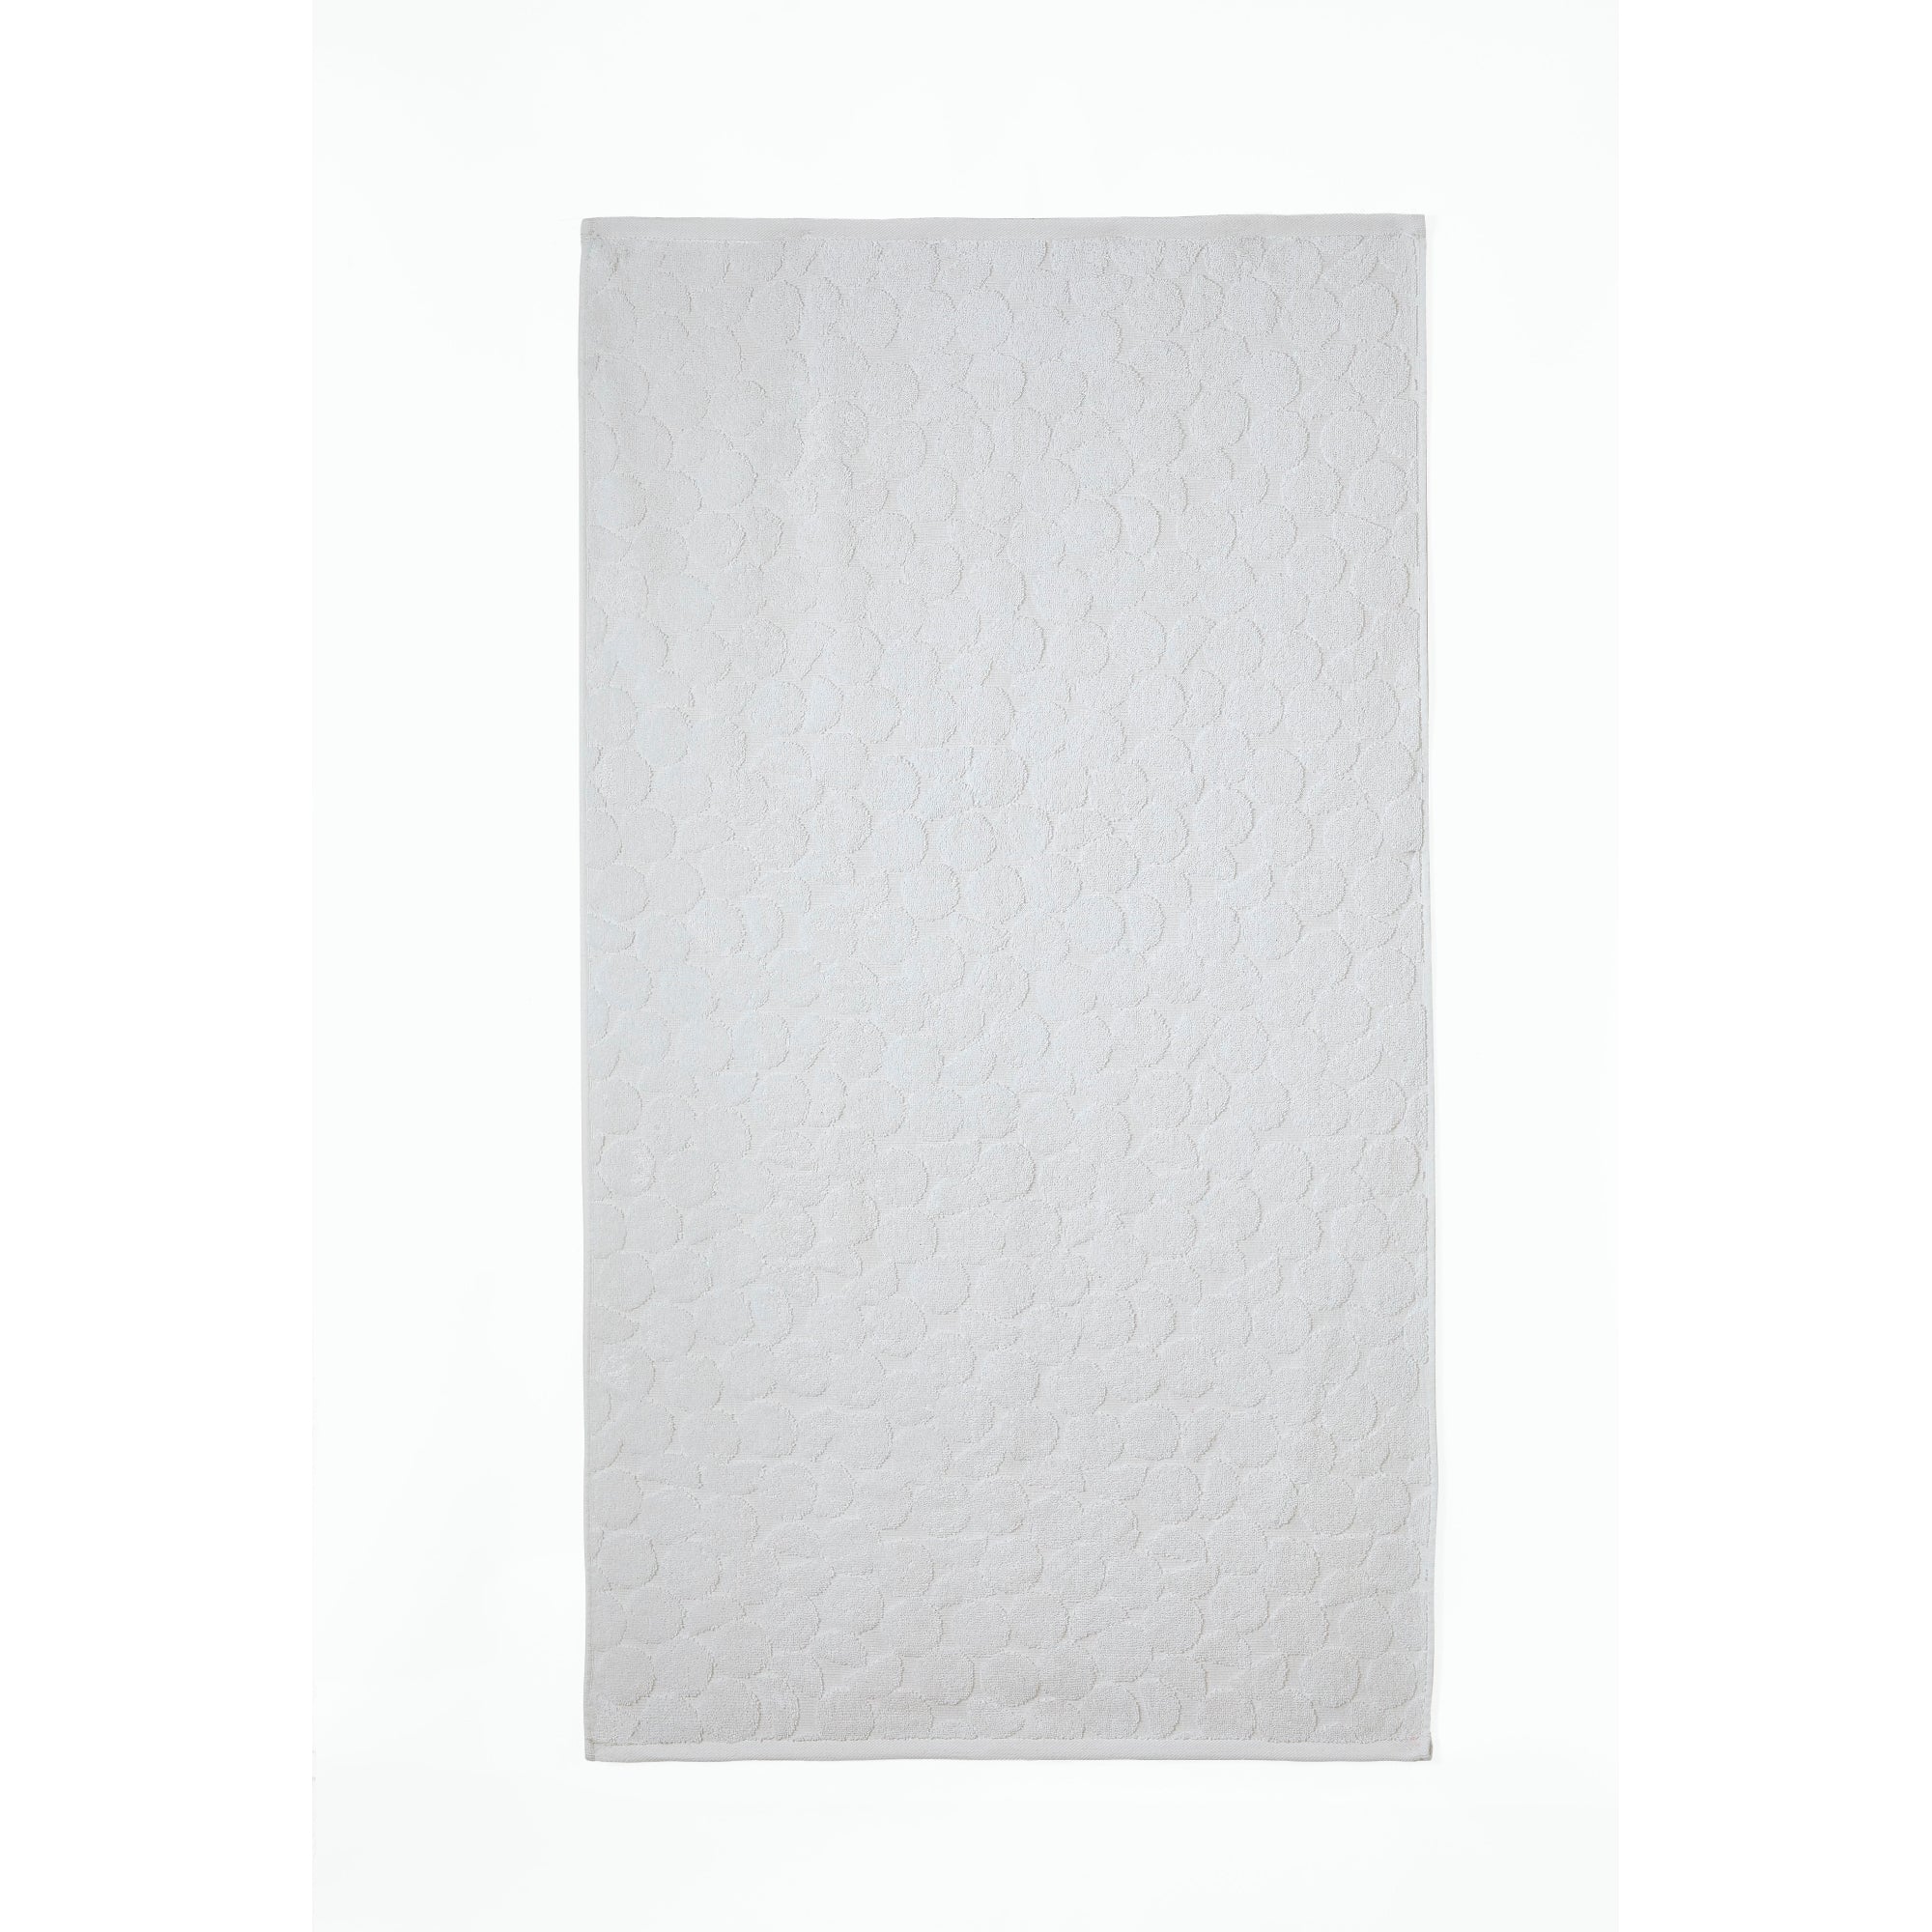 Hand Towel Ingo by Fusion in White